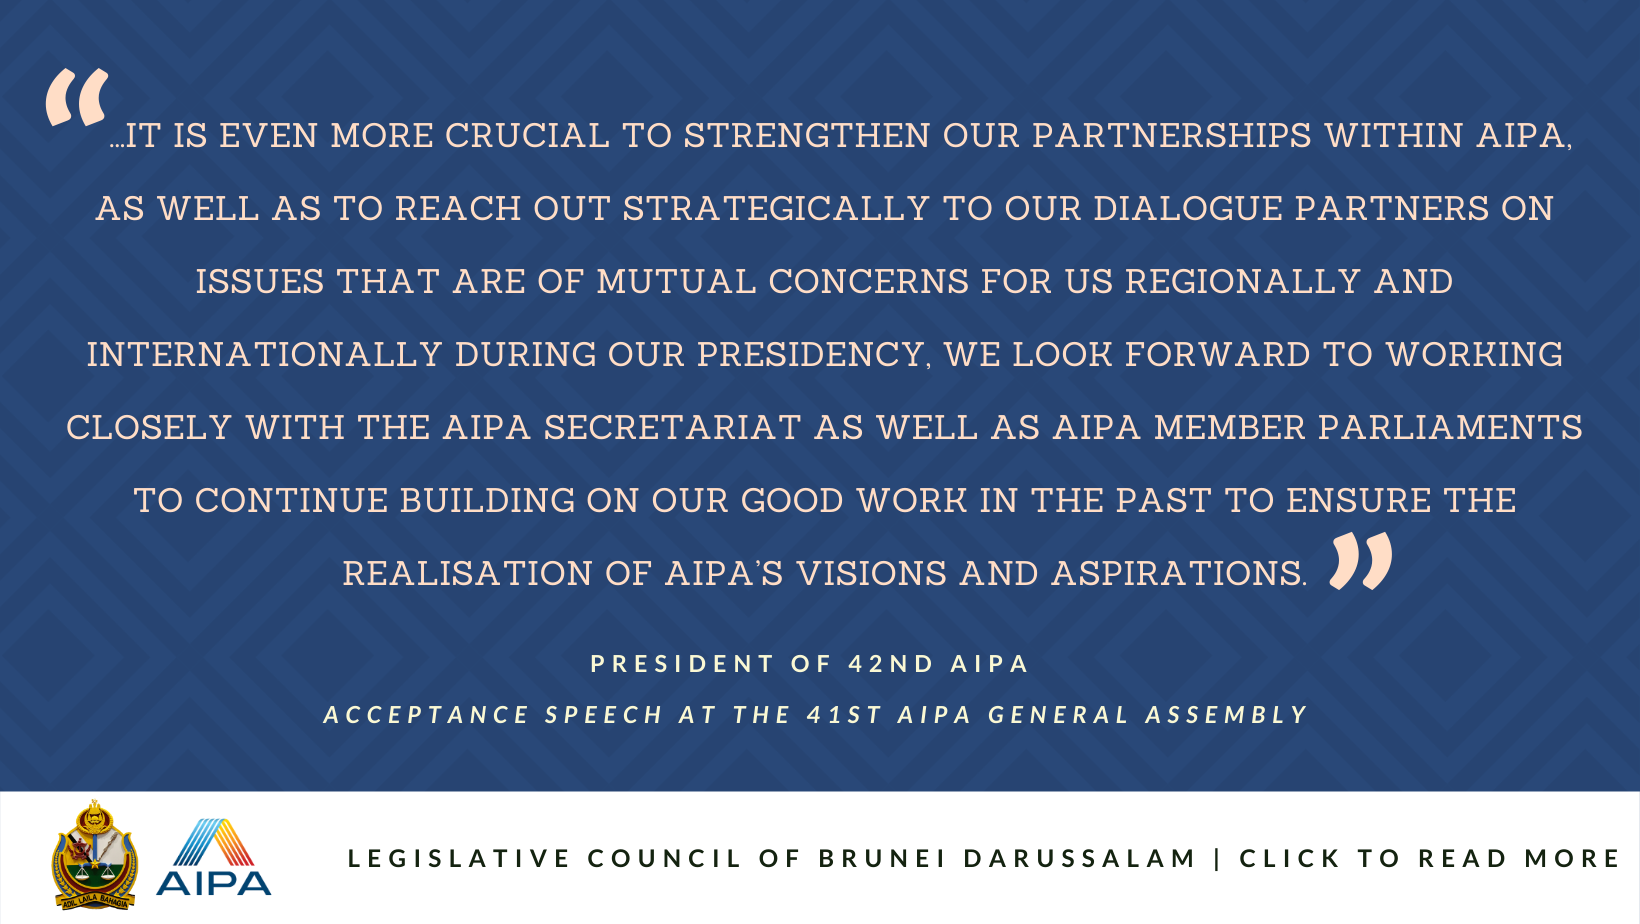 ACCEPTANCE SPEECH AT THE 41ST AIPA GENERAL ASSEMBLY